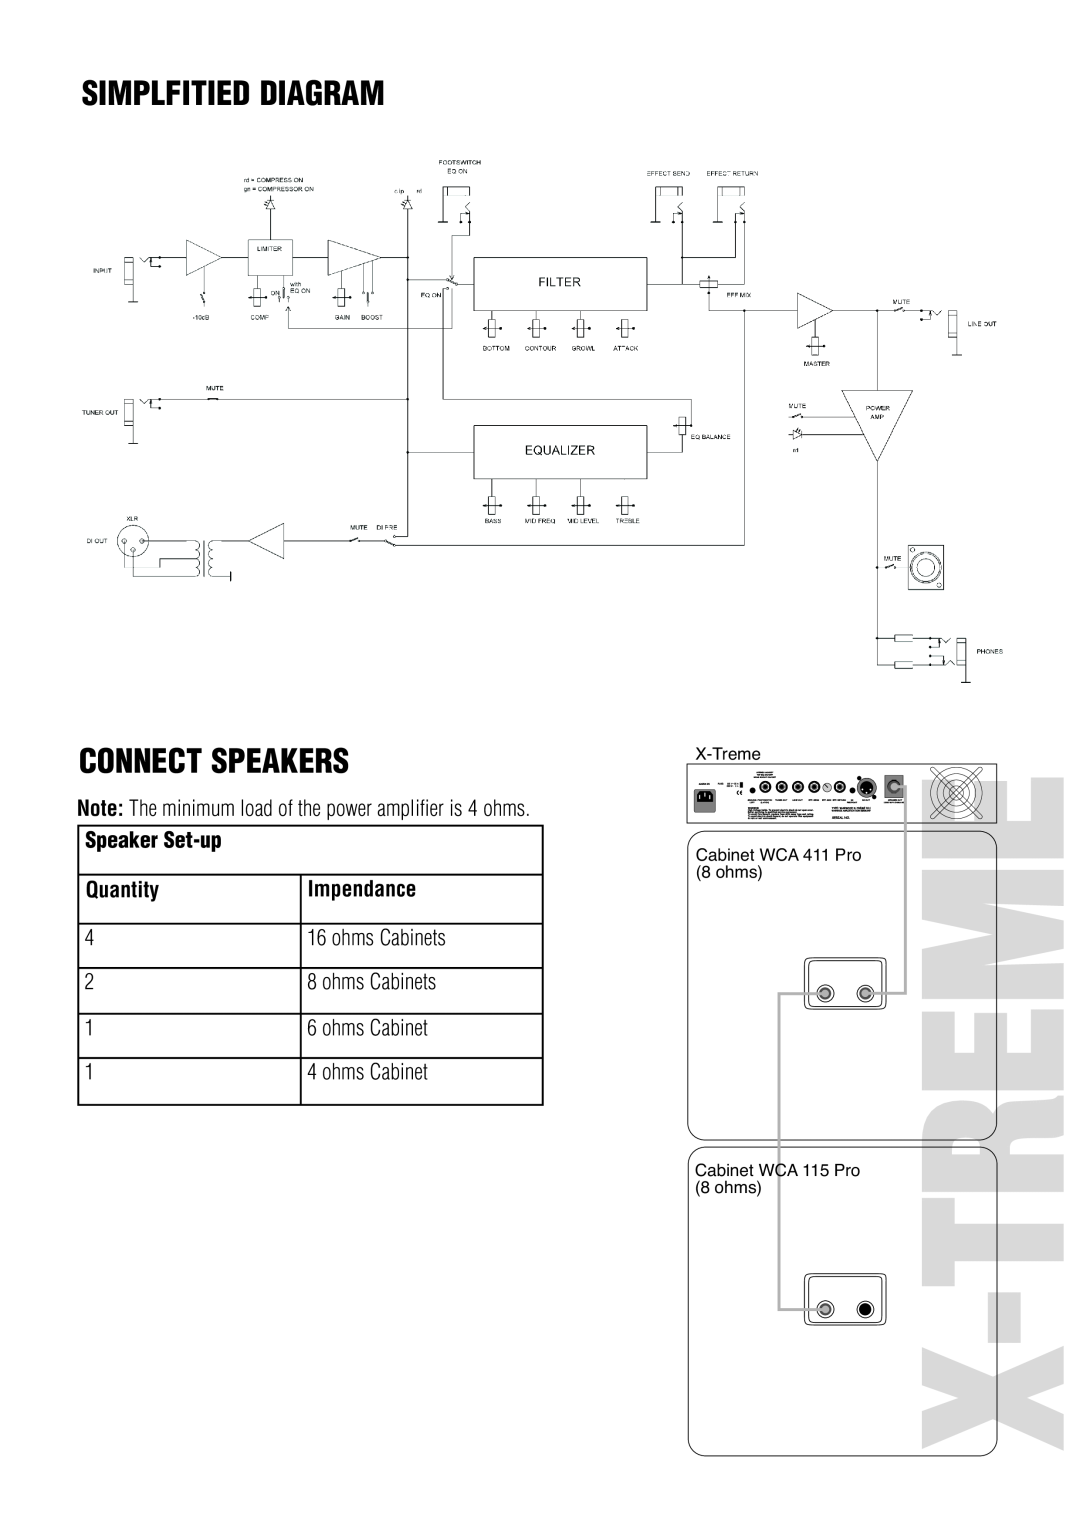 Warwick 10.1, 5.1 owner manual Simplfitied Diagram Connect Speakers, X-Treme, FUSE 115 V ~ 15 A 230 V~ 8 A 